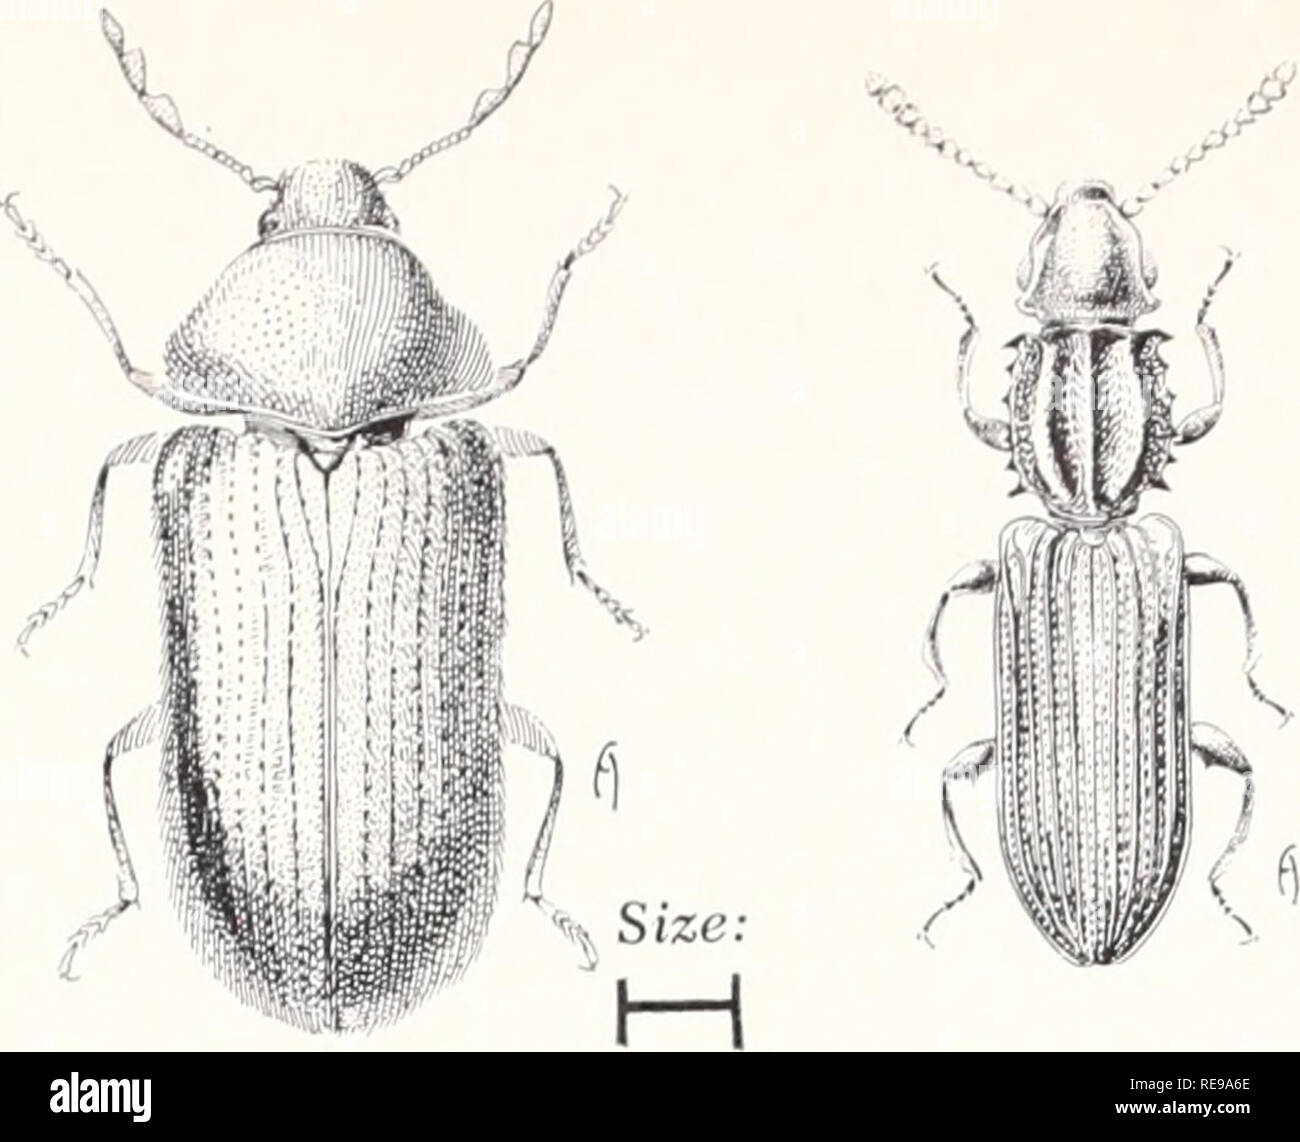 . Control of household insects and related pests. Household pests; Insect pests. Size: H Drugstore Beetle, Stegobium paniceum (Linn.) Saw-toothed Grain Beetle, Oryzaephilus surinamensis (Linn.) which can be grouped as pantry beetles. Control will differ according to their feeding habits—whether they are general feeders or restricted feeders. Restricted feeders, such as the bean weevil, Acanthoscelides obtectus (Say), the granary weevil, Sitophilus granarius (Linn.), and the rice weevil, Sitophilus oryzae (Linn.), feed primarily on seeds. Eggs are laid on the seeds, the larvae bore inside to co Stock Photo